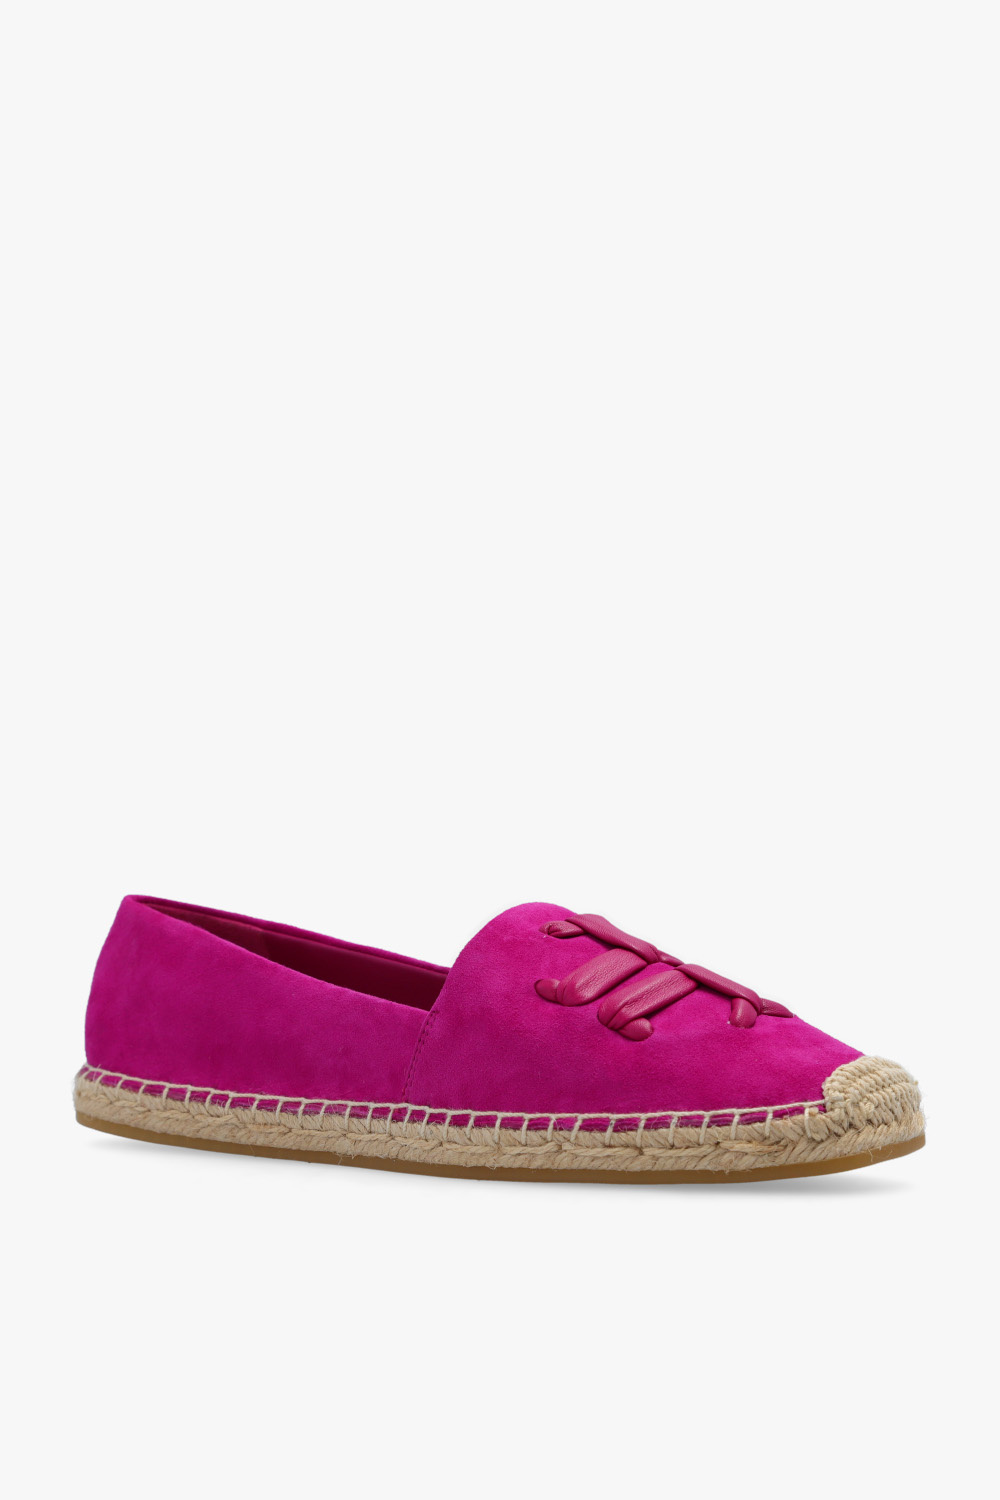 Tory Burch Espadrilles with logo